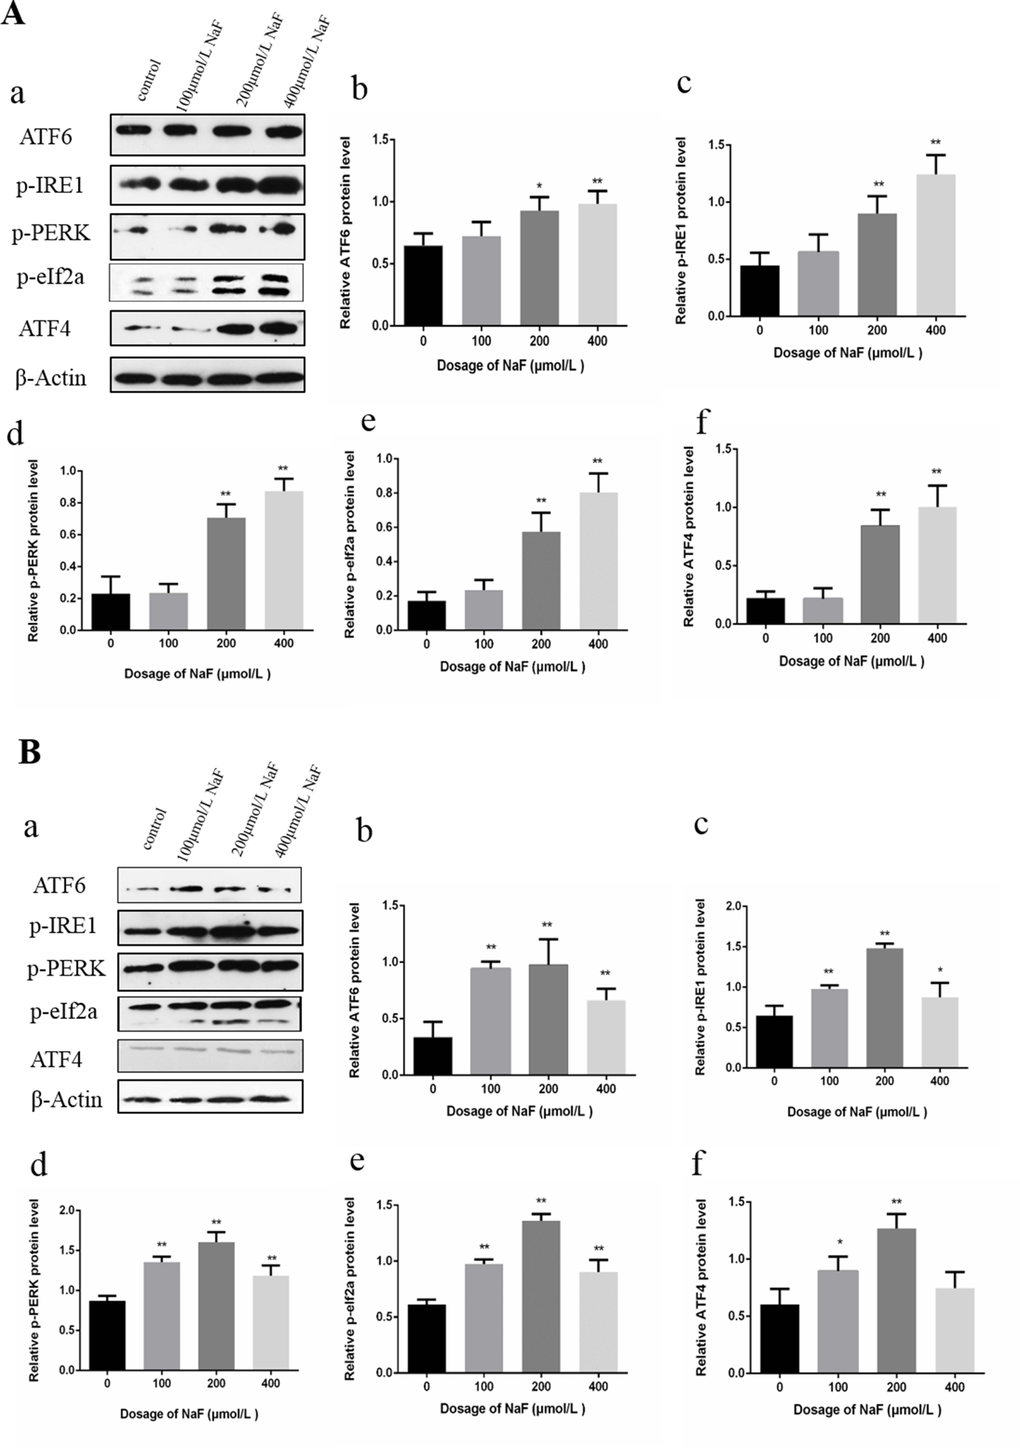 Effect of NaF on protein expression levels of ATF6, p-IRE1, p-PERK, p-eIf2a and ATF4 in cultured splenic lymphocytes at 24 h (A) and 48 h (B). (a) The western blot assay. (b-f) Quantitative analysis of protein expression. Data are presented with the means ± standard deviation, * p p 